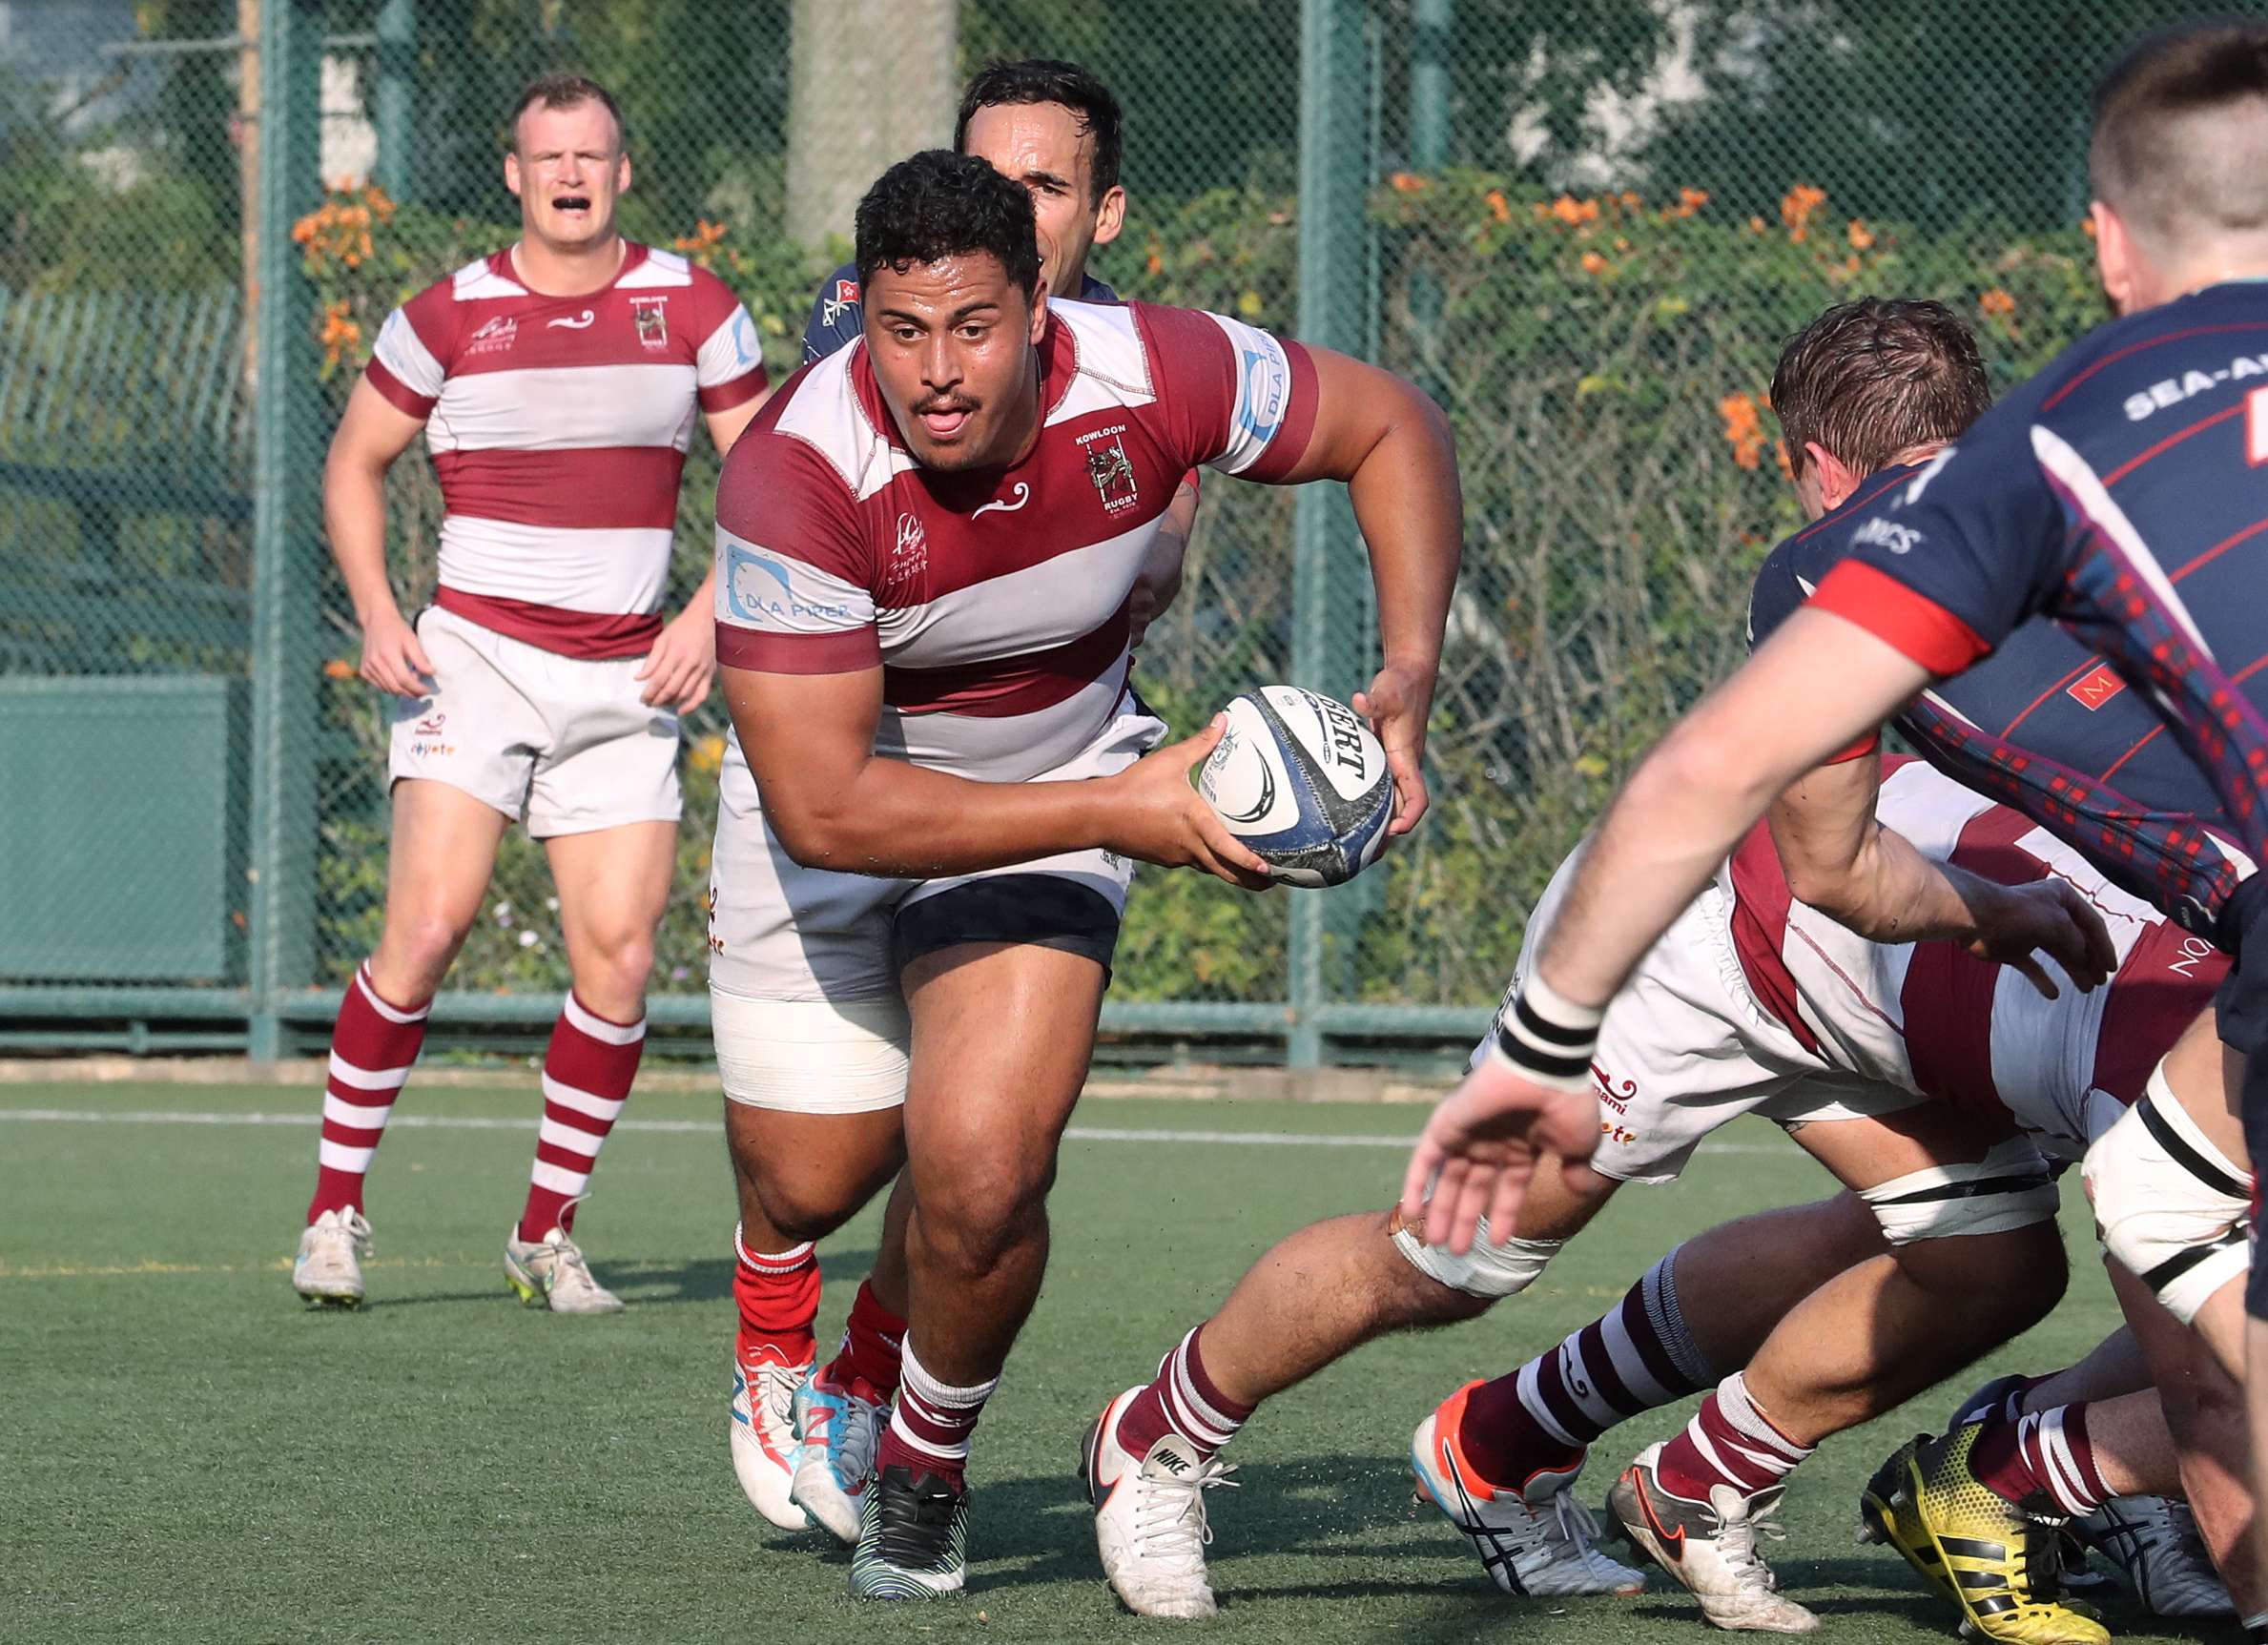 Kowloon’s Turoa Stephens launches one of his trademark carries against Scottish in the Hong Kong Premiership on Saturday. Photo: Edward Wong